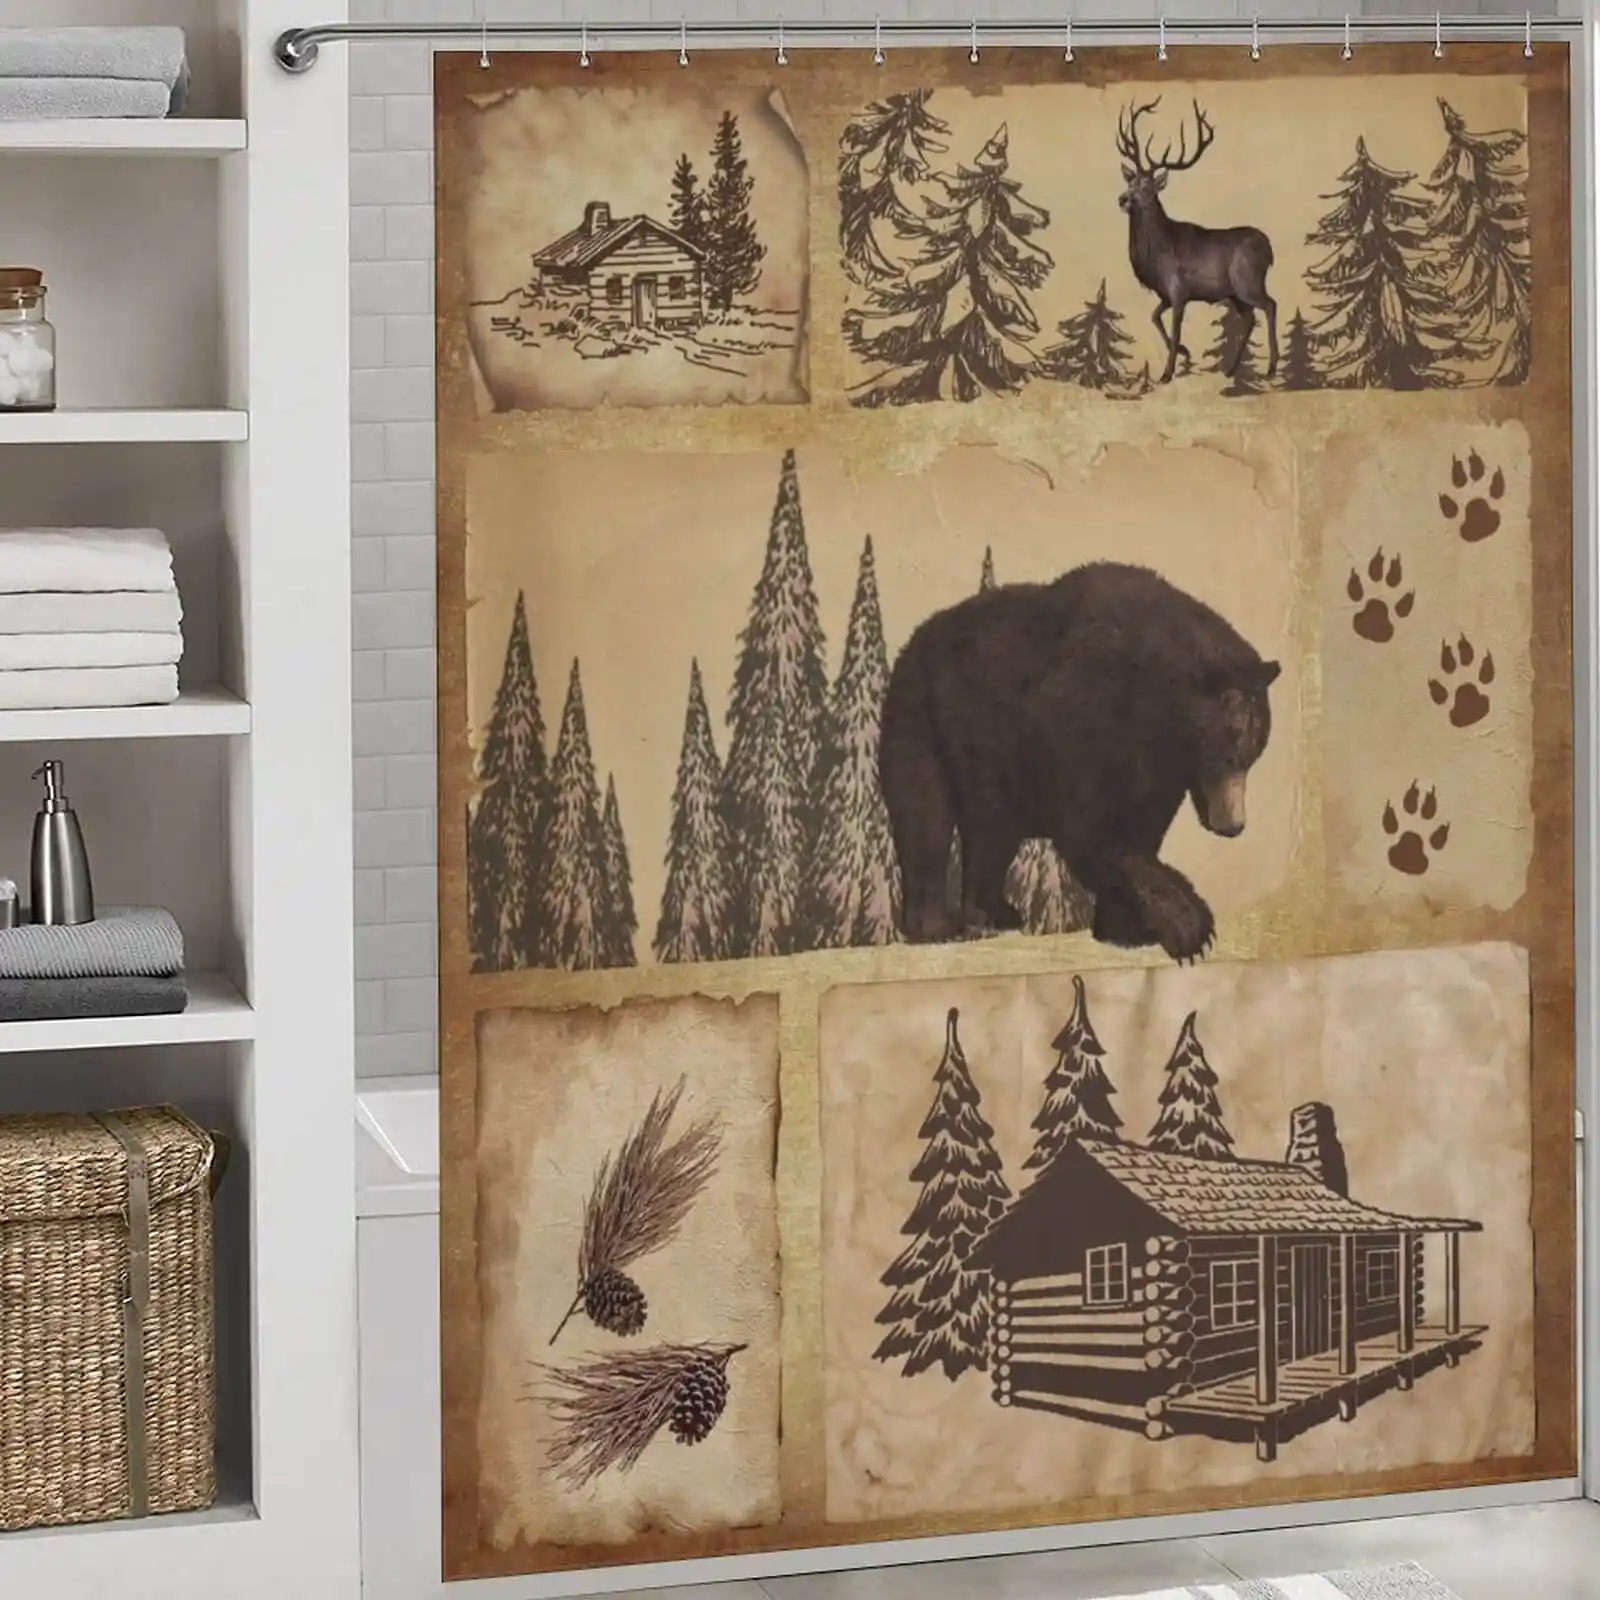 A shower curtain with bears, moose, and a cabin.